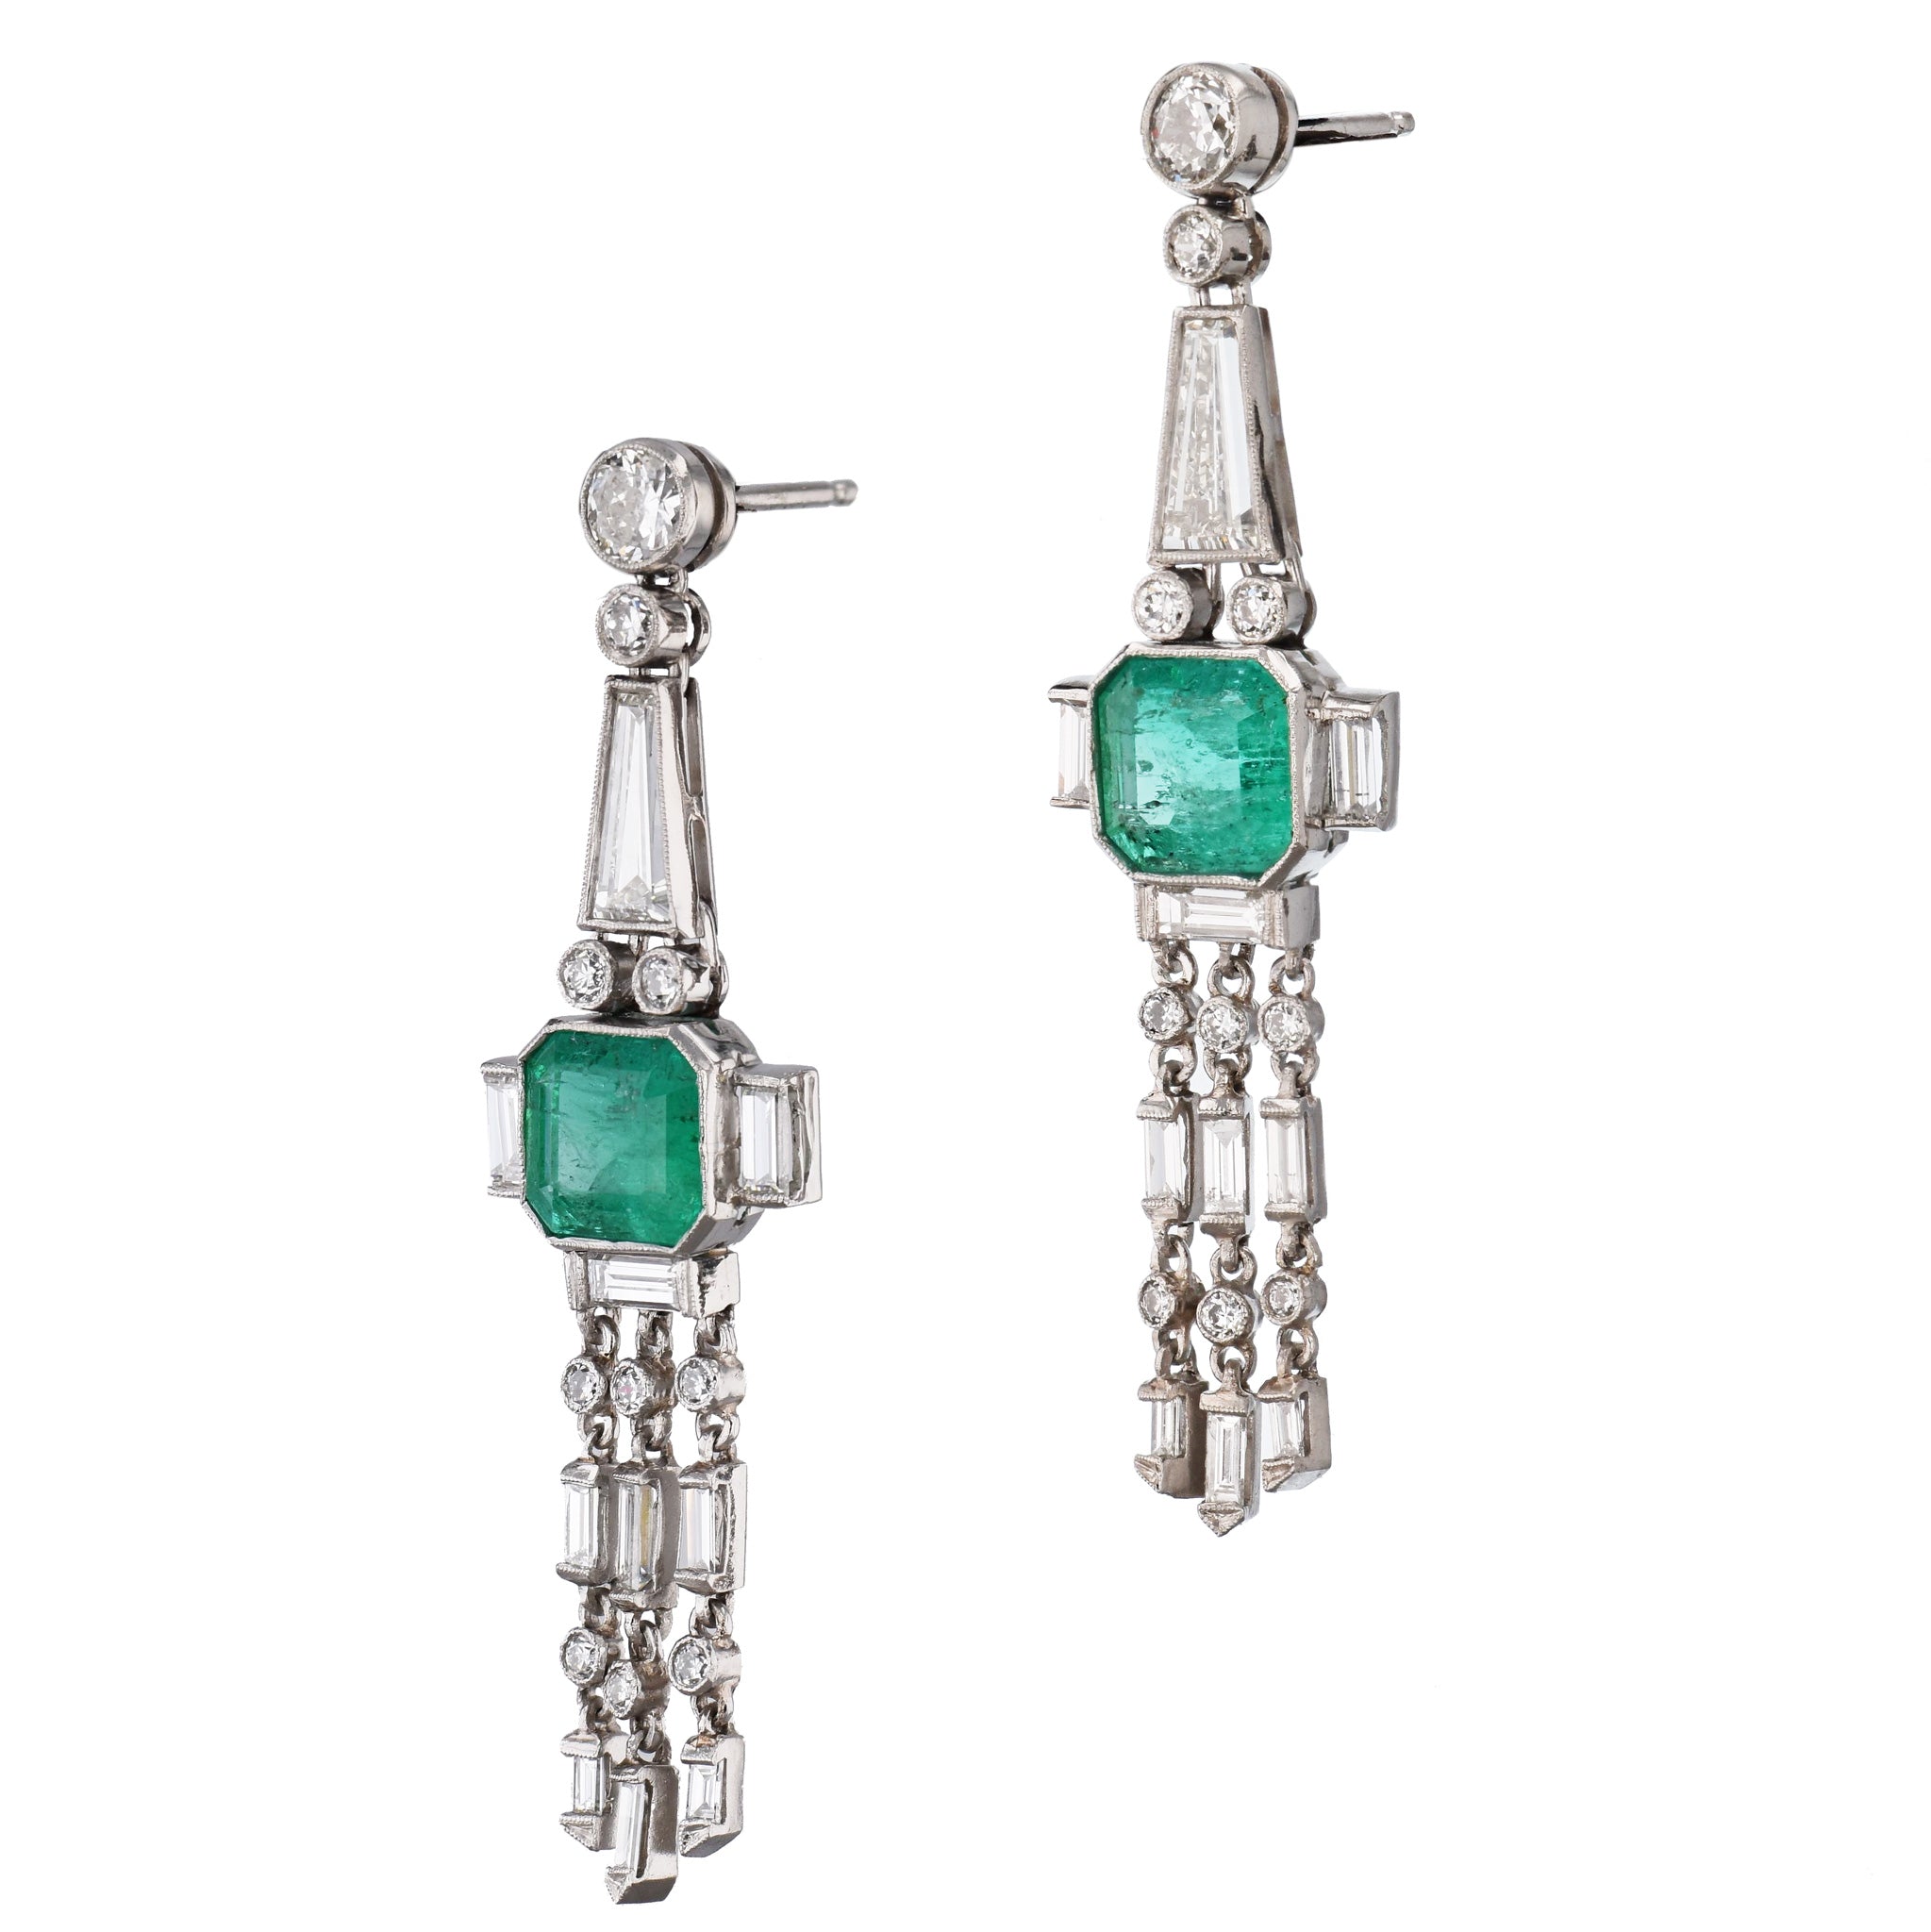 Platinum Diamond Deco Emerald Earrings Earrings Curated by H